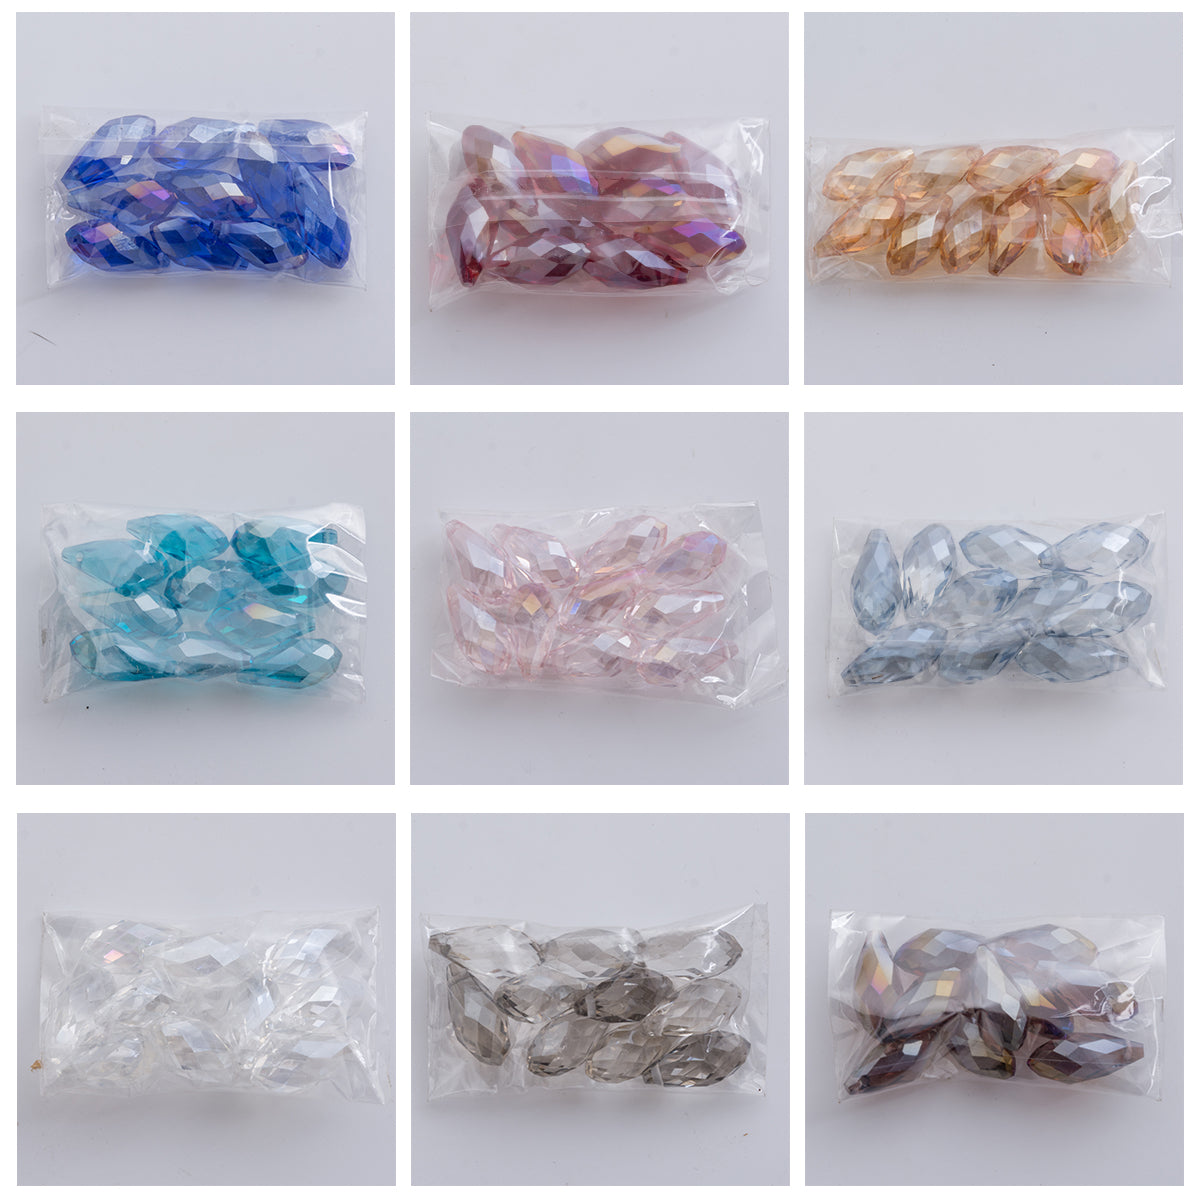 8x18mm Crystal Oval Shaped Faceted Beads for DIY Beading Projects (90 pcs)